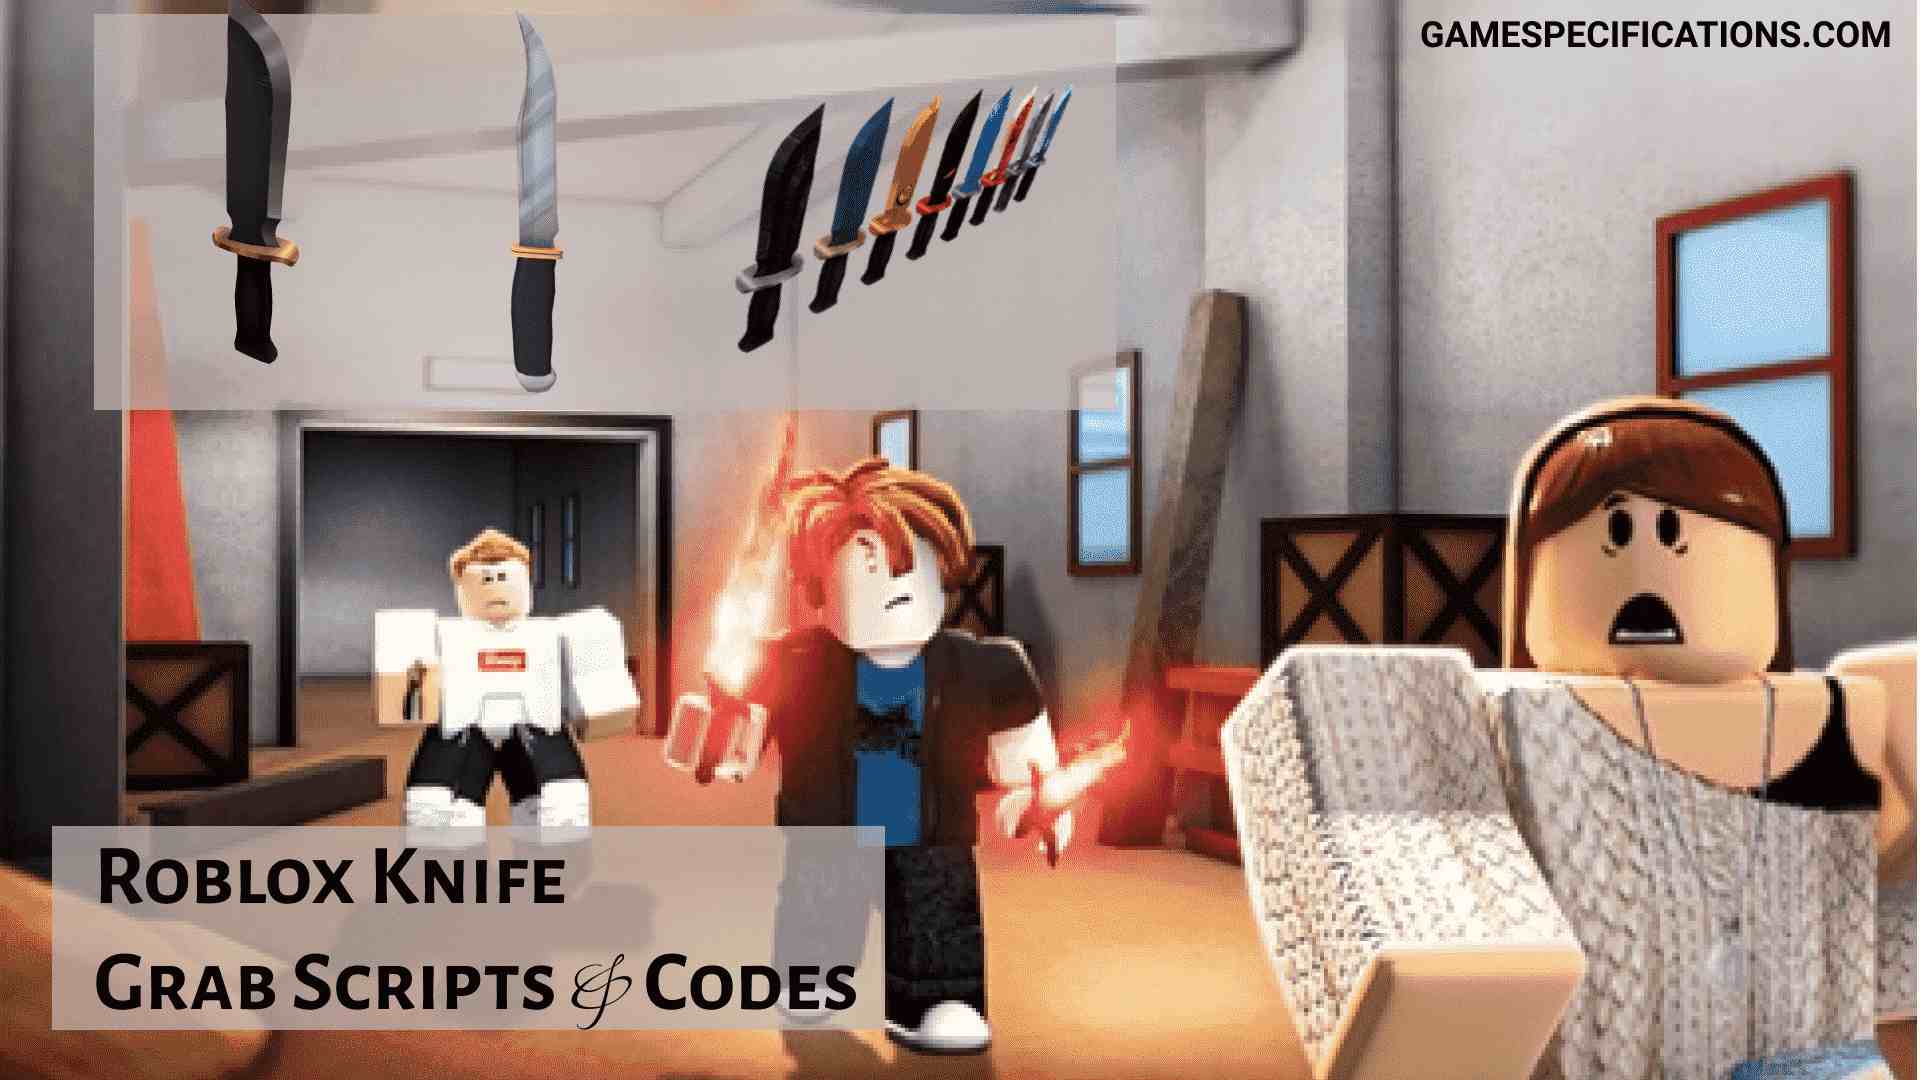 Roblox Knife Grab Script Codes 2021 Game Specifications - avatar nocollide roblox scipt